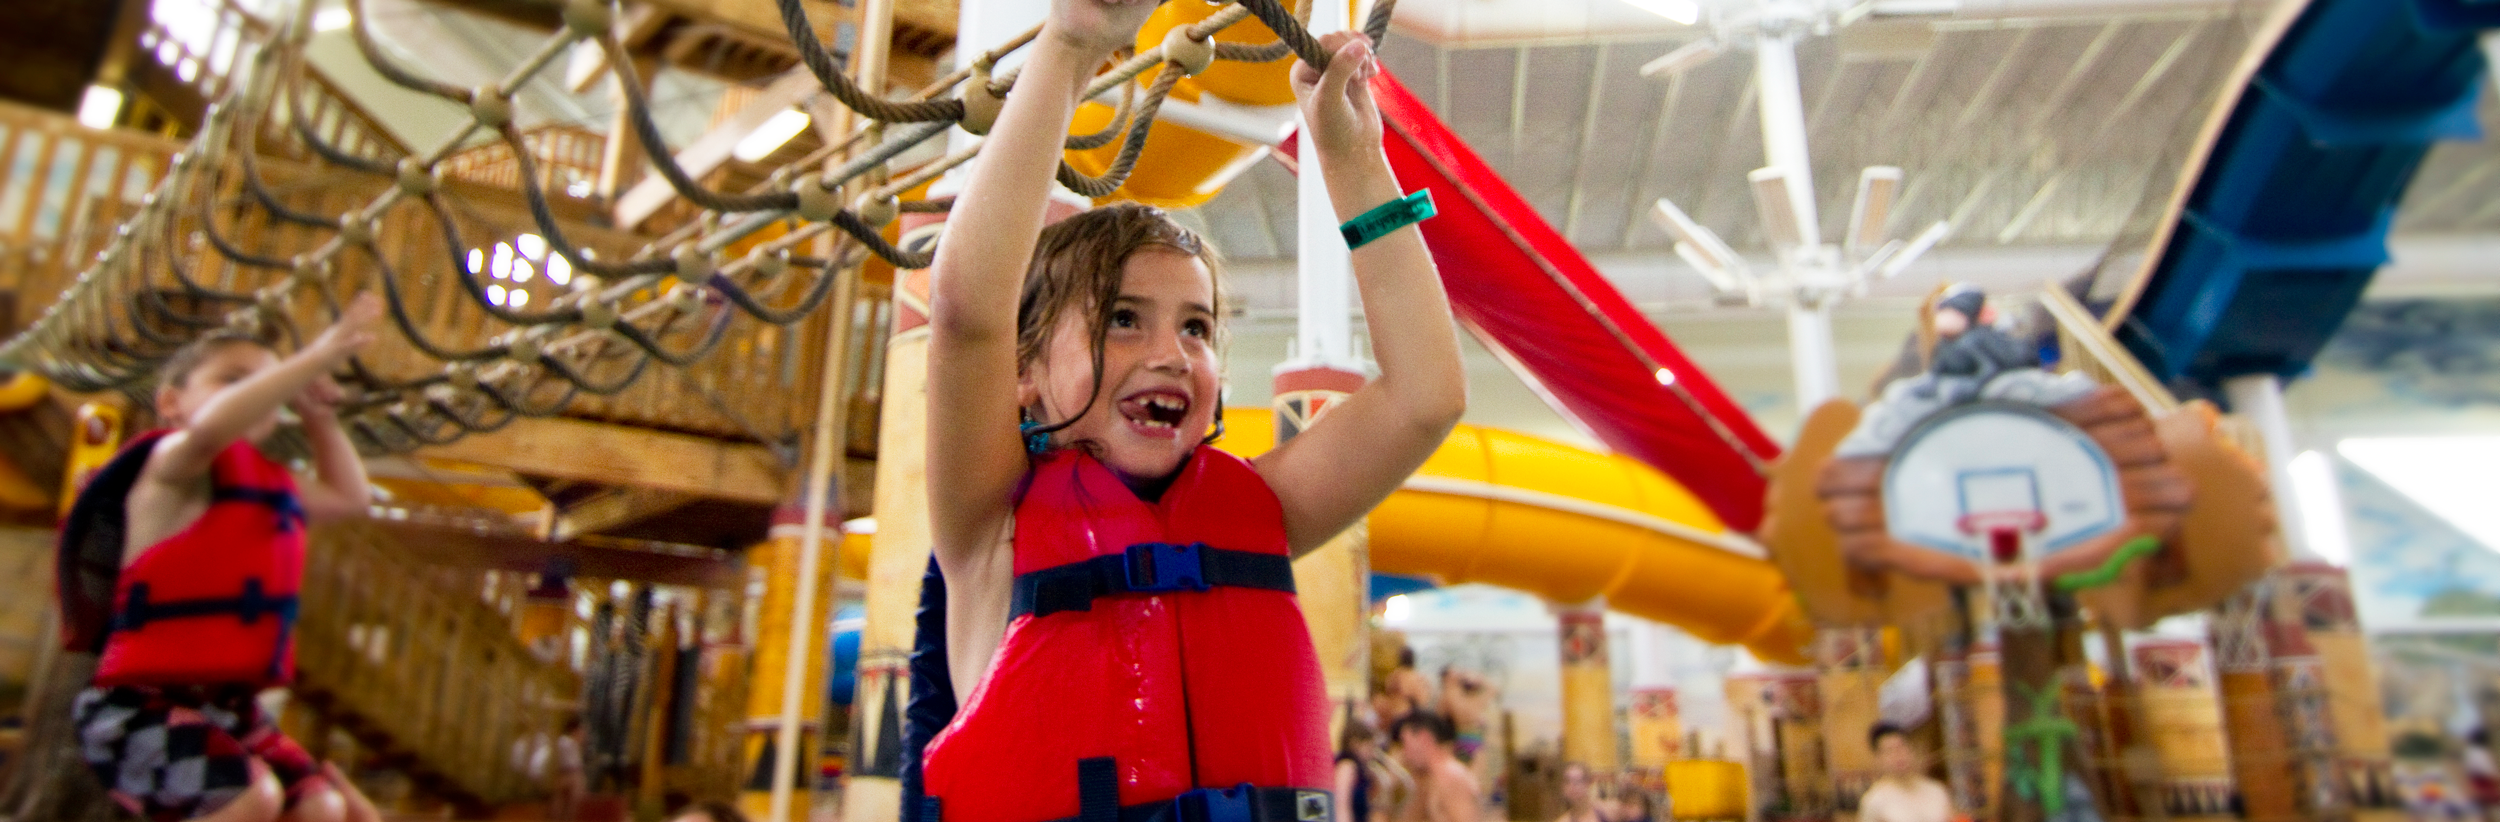 Young girl swinging from monkey bars wearing a life jacket in a water park